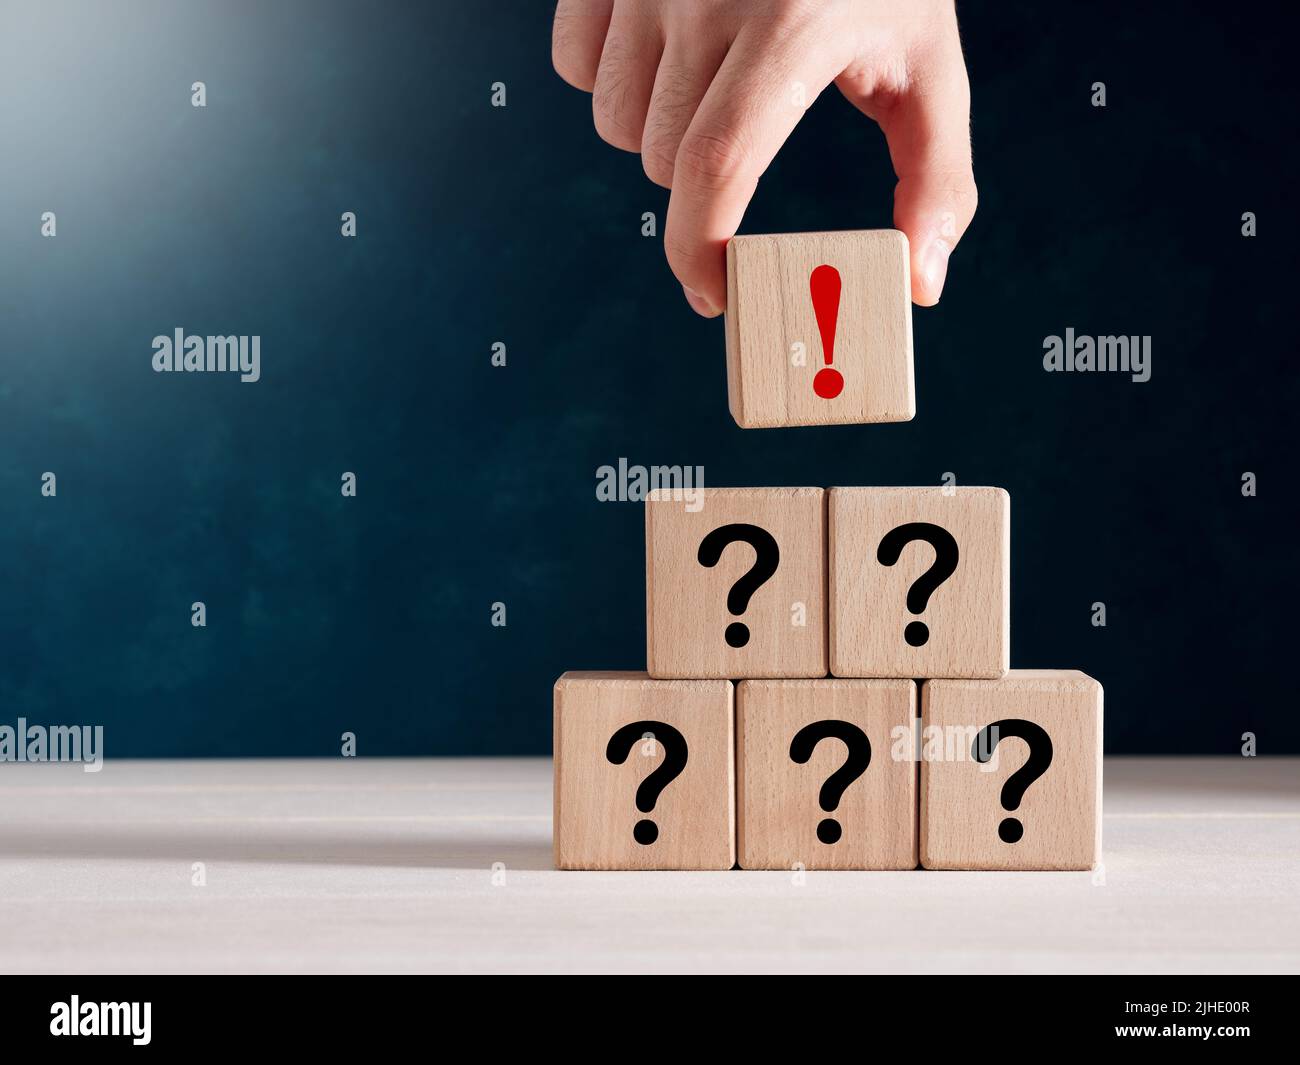 Concept of uncertainty, confusion and suspicion. Hand puts a wooden cube with exclamation mark at the top of stacked cubes with question mark. Stock Photo